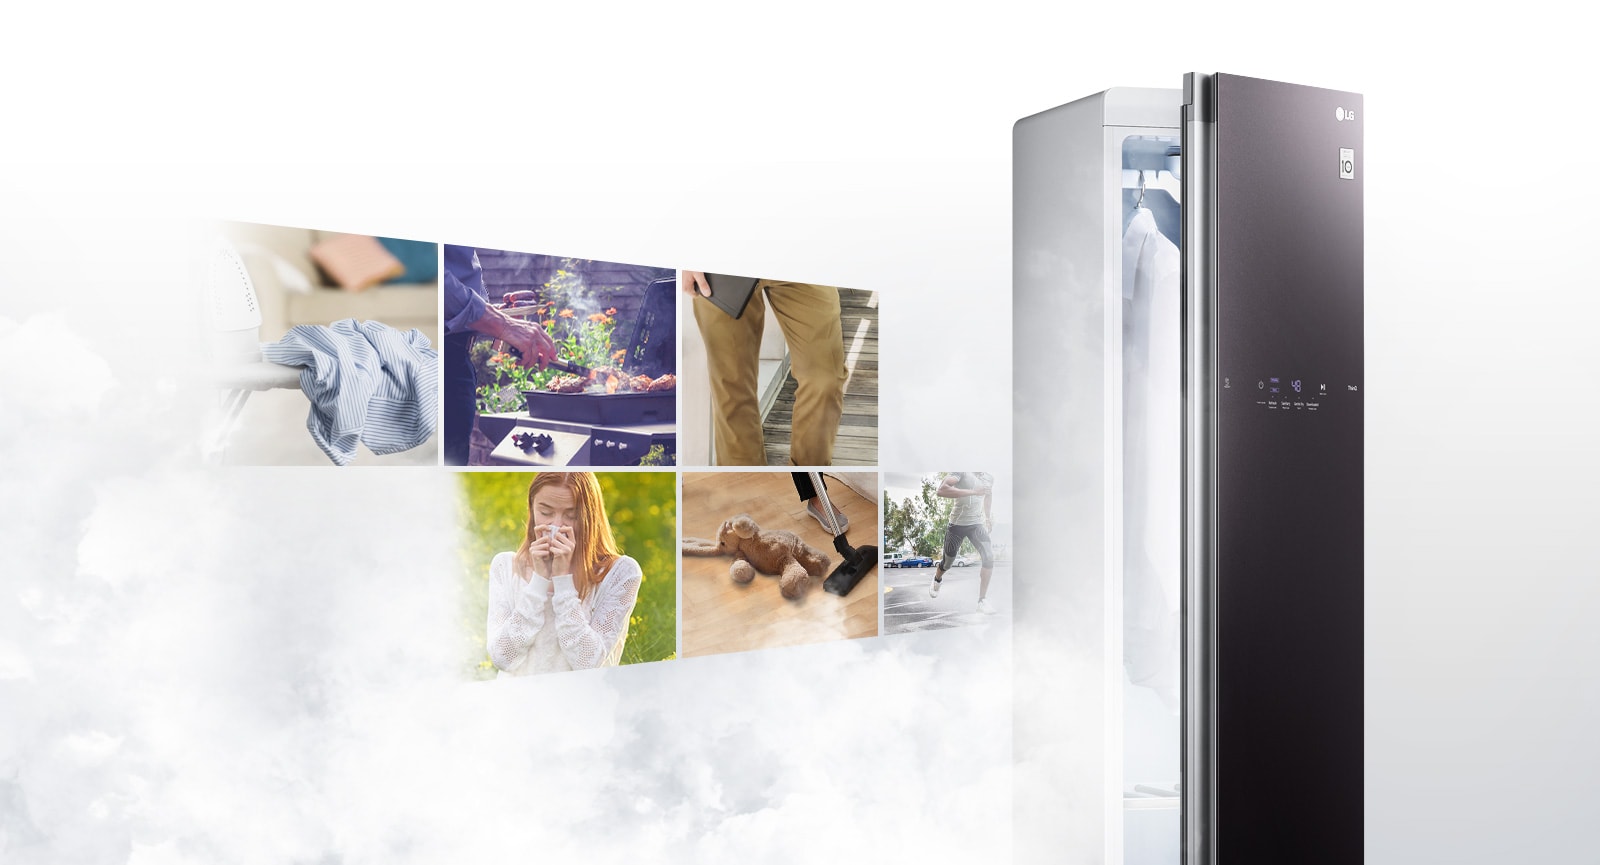 Various allergic conditions are listed like a panoramic film, and an LG Styler® product with a half-open door is standing next to it, expressing that Styler®steam can remove it.